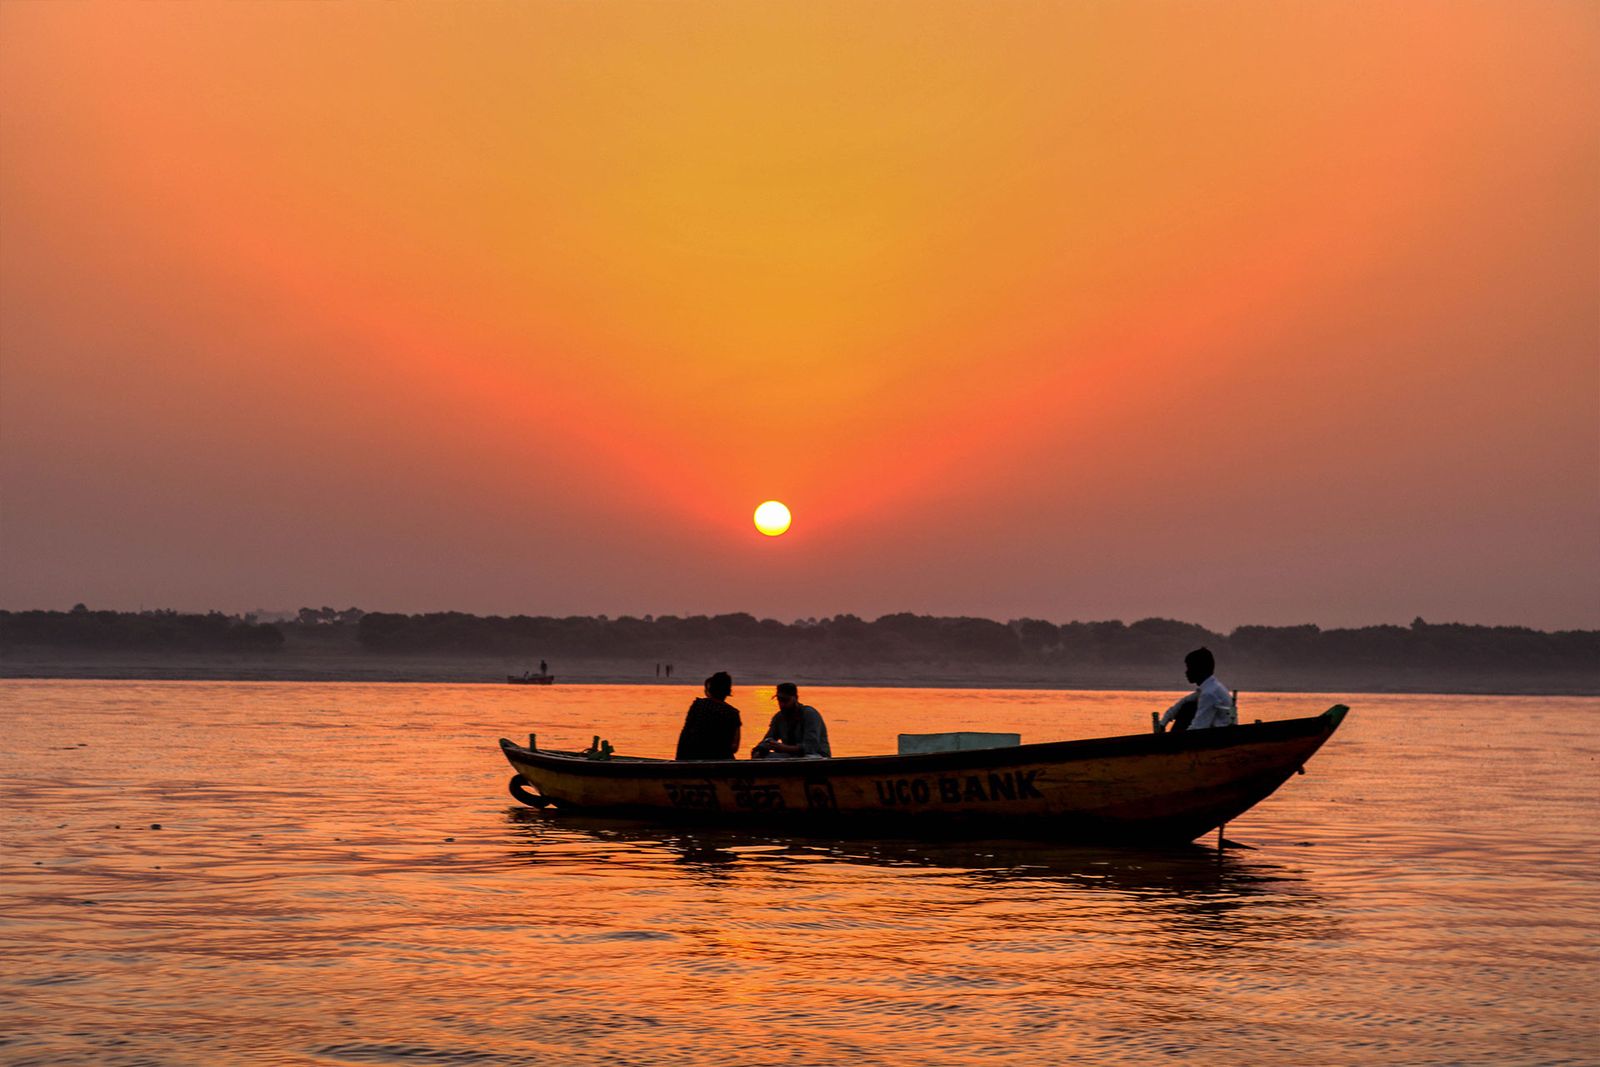 Sunset Boatride on the spiritual River Ganges